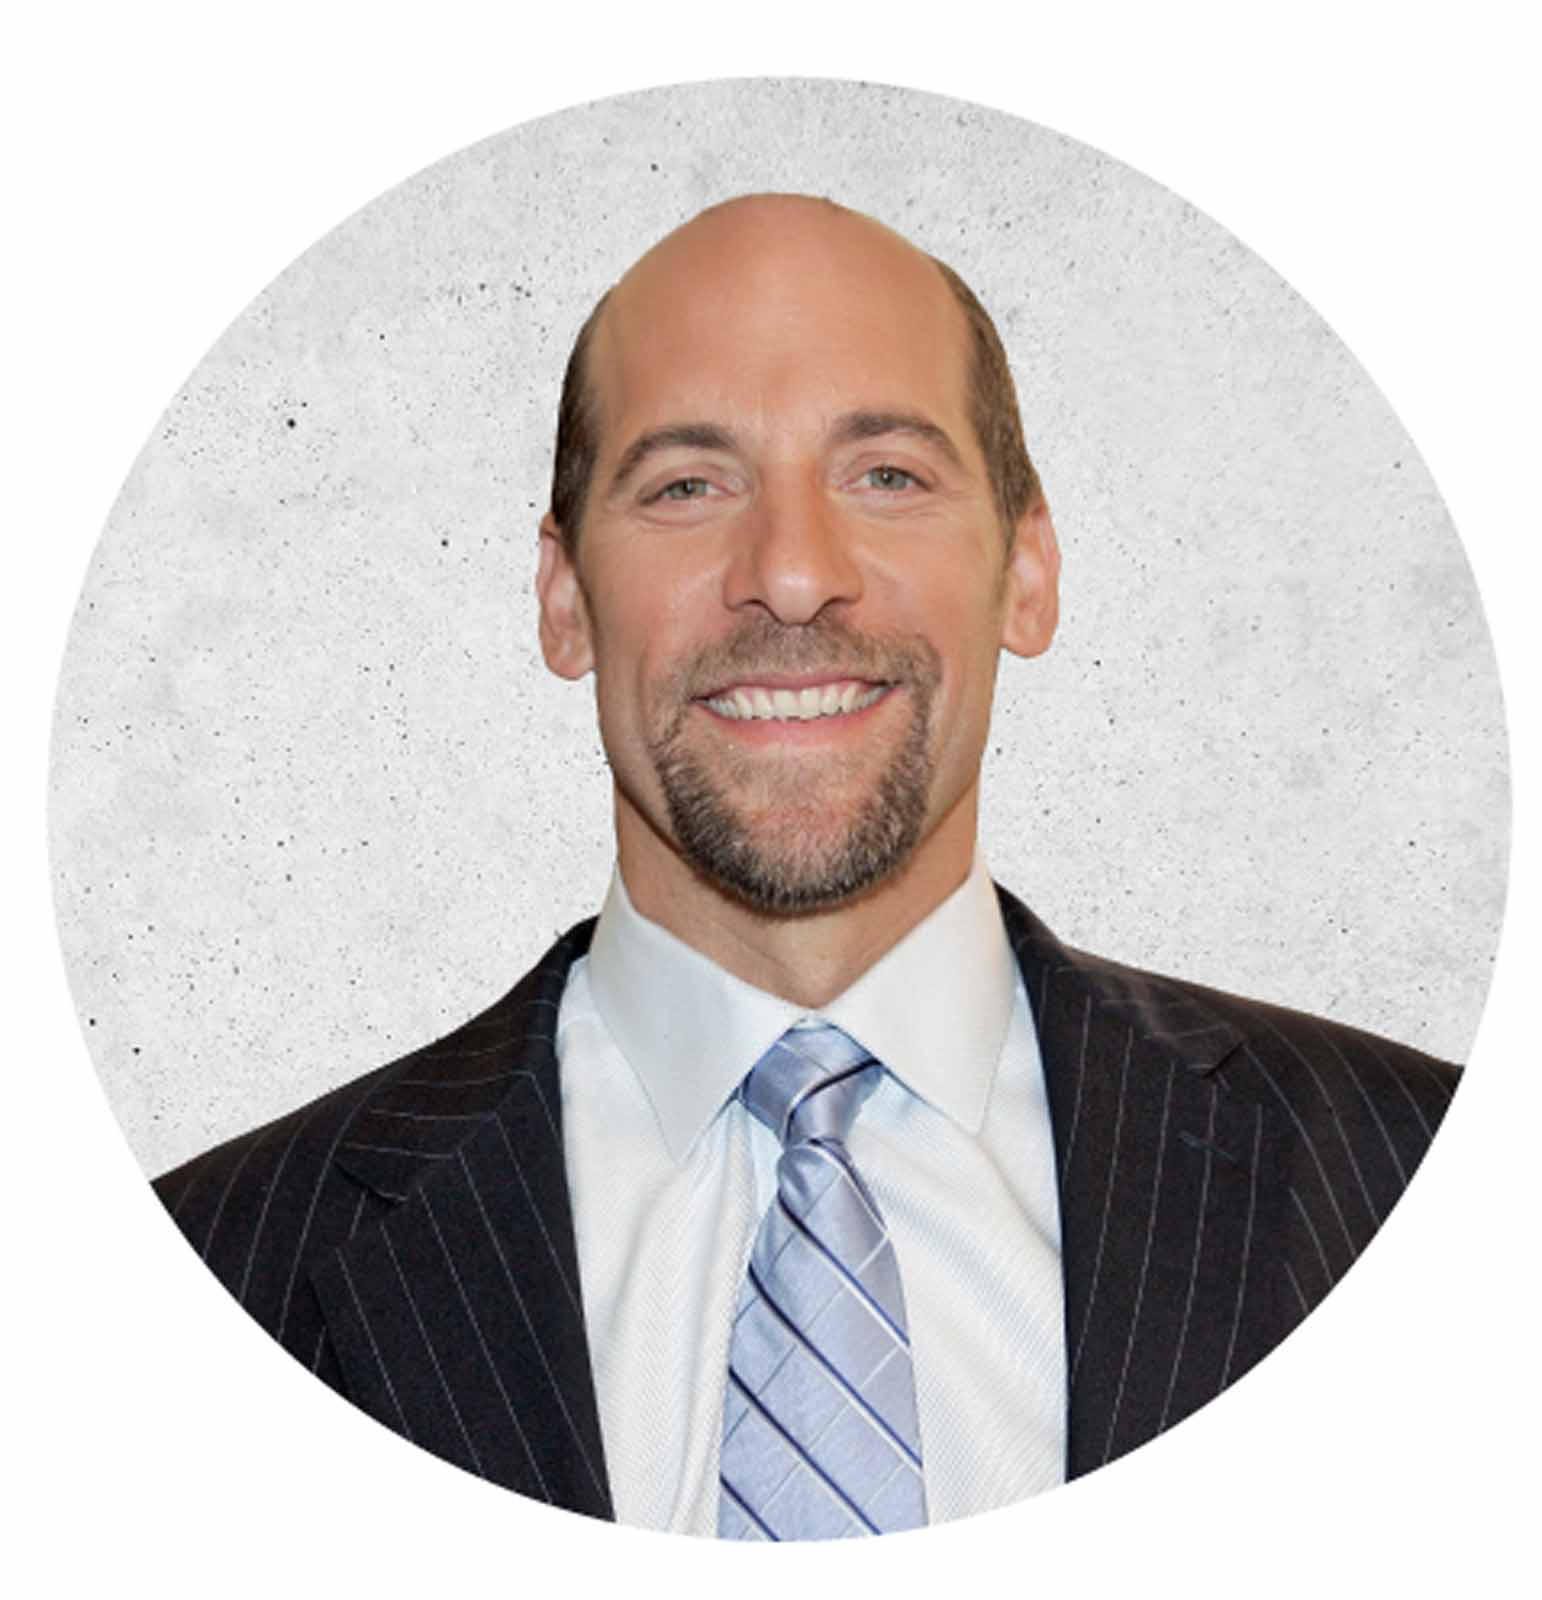 Hope For Healing Dinner To Feature Smoltz